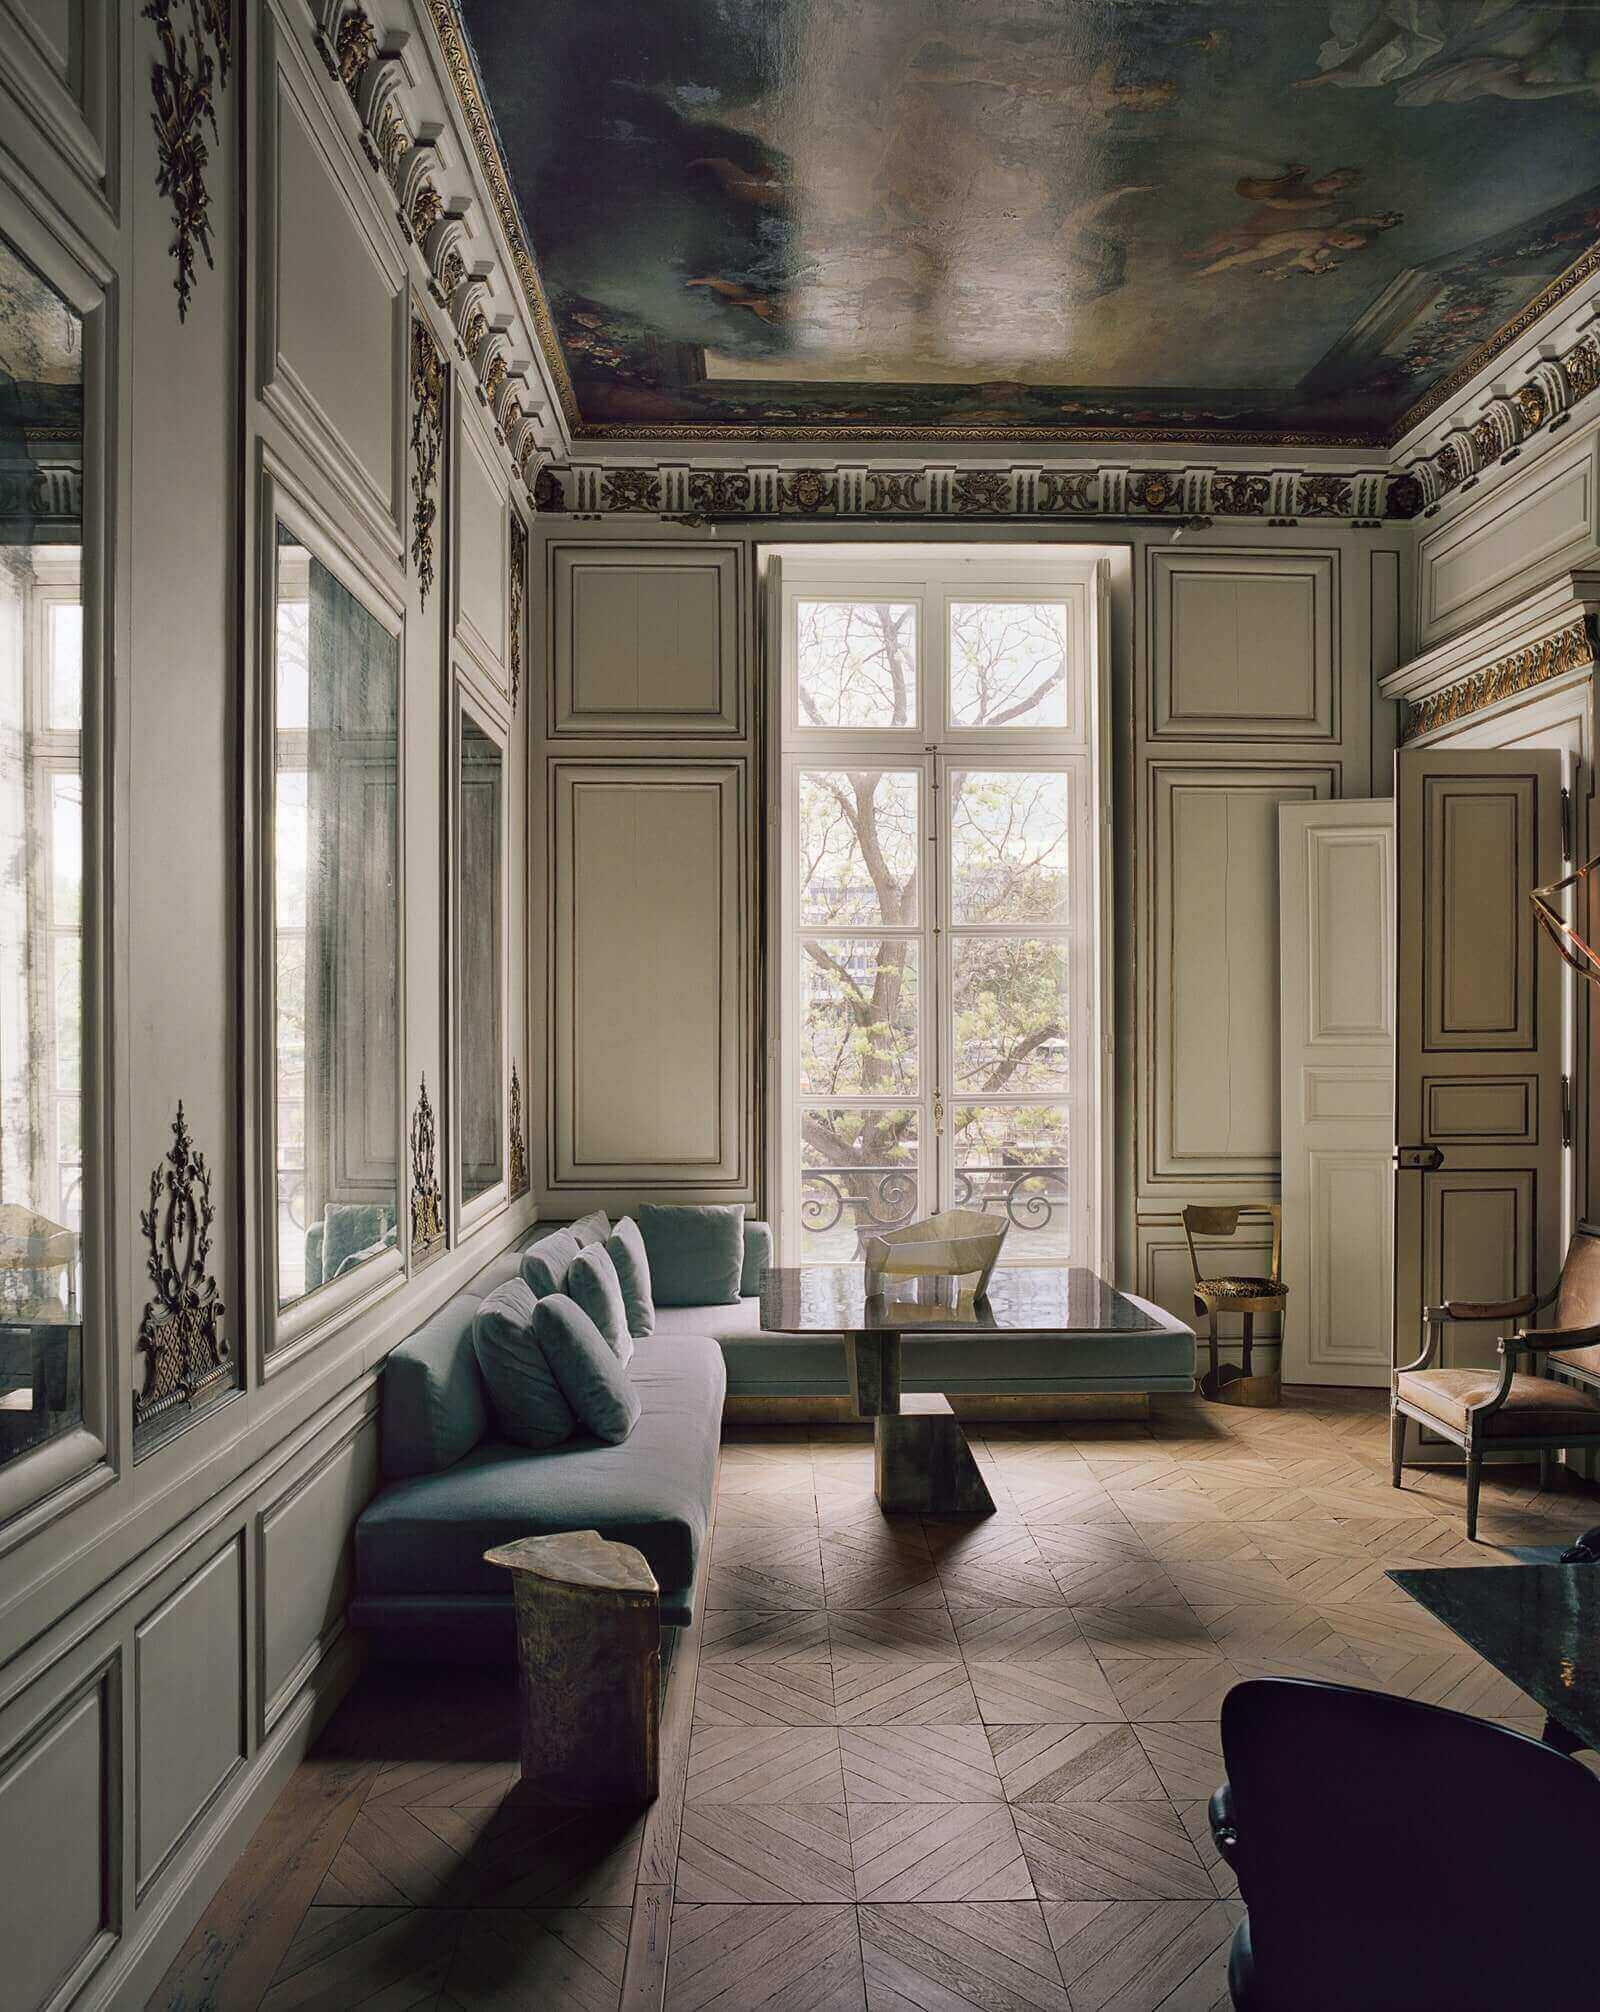 The Juxtaposition of Classicism and Contemporary In The Heart Of Paris